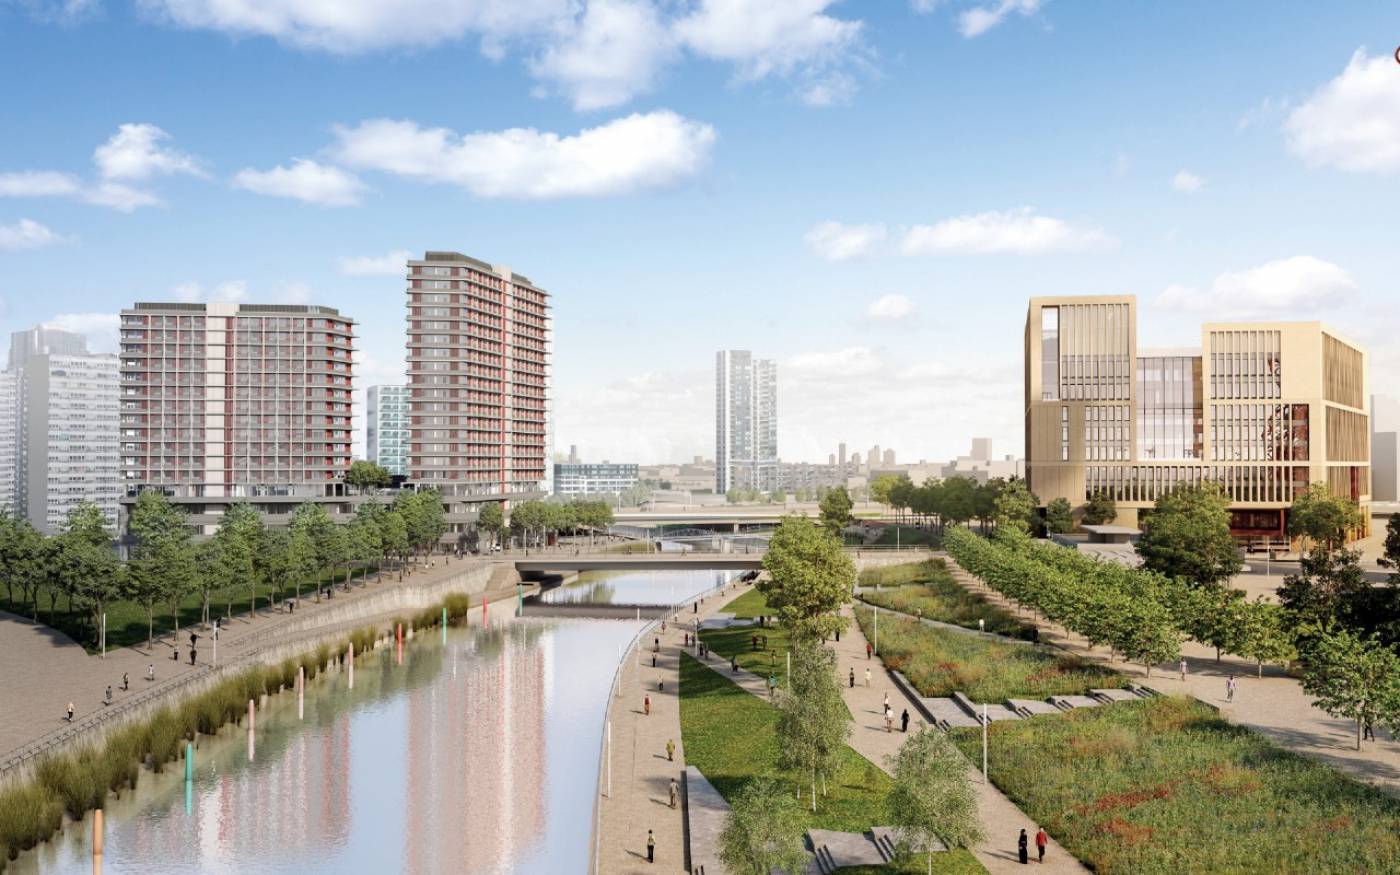 artist's impression of UCL East, tall buildings around a canal